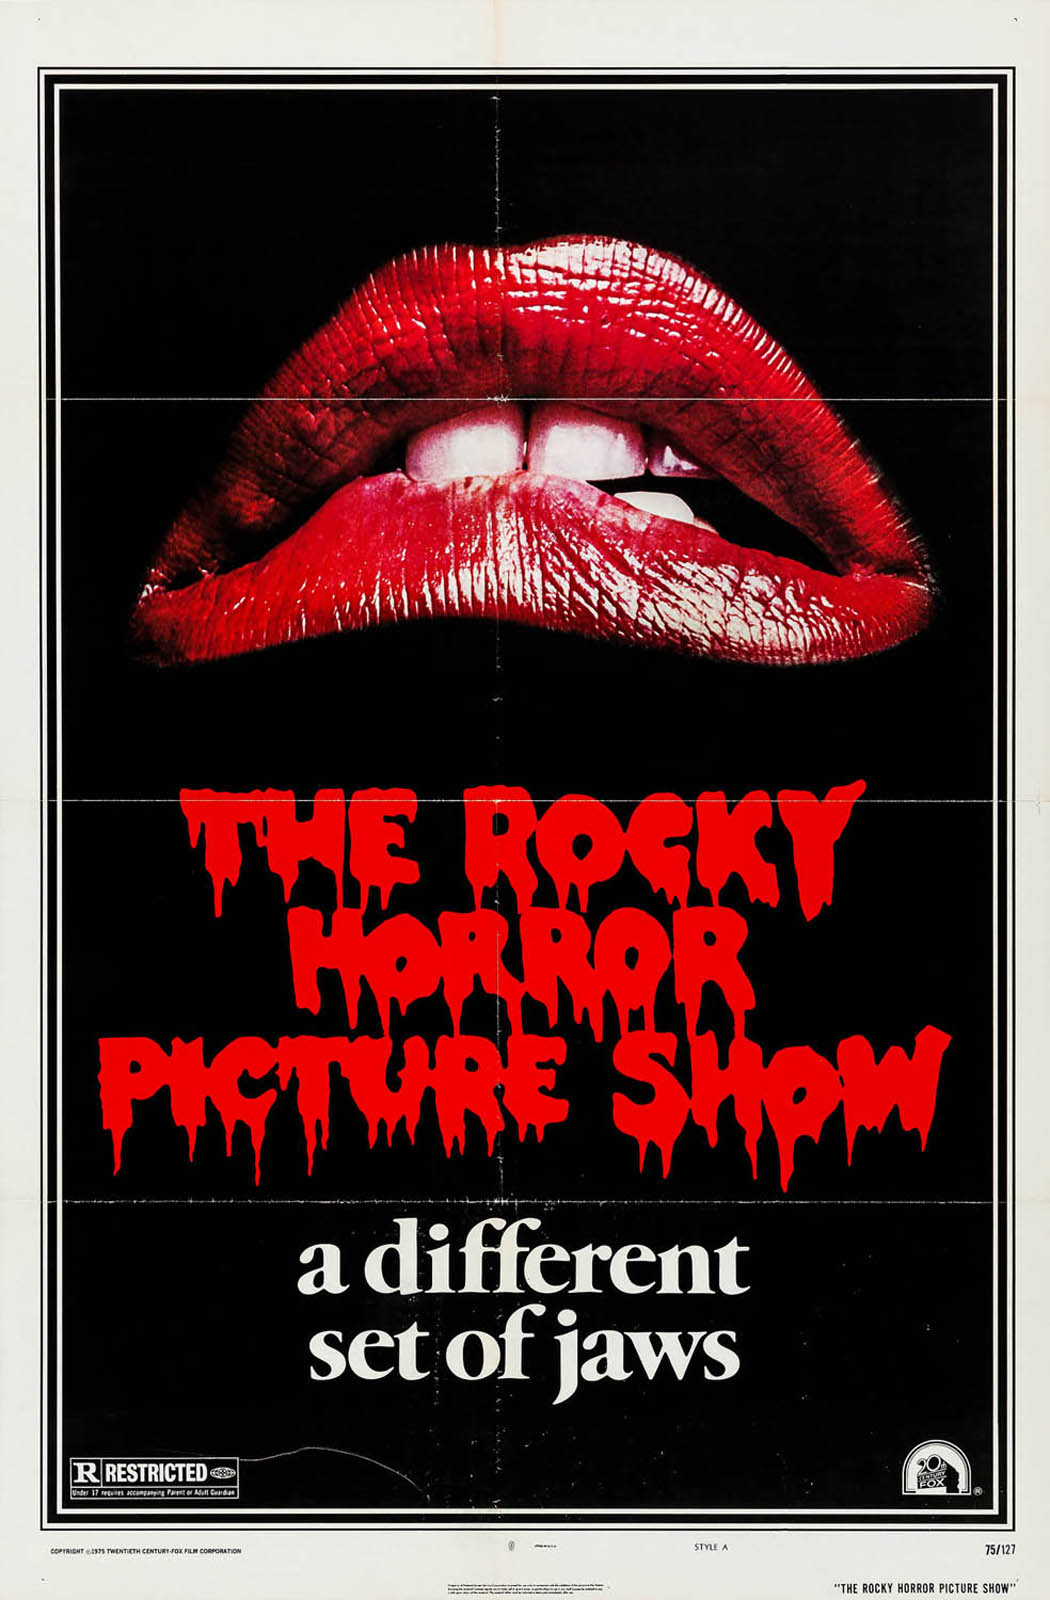 ROCKY HORROR PICTURE SHOW, THE